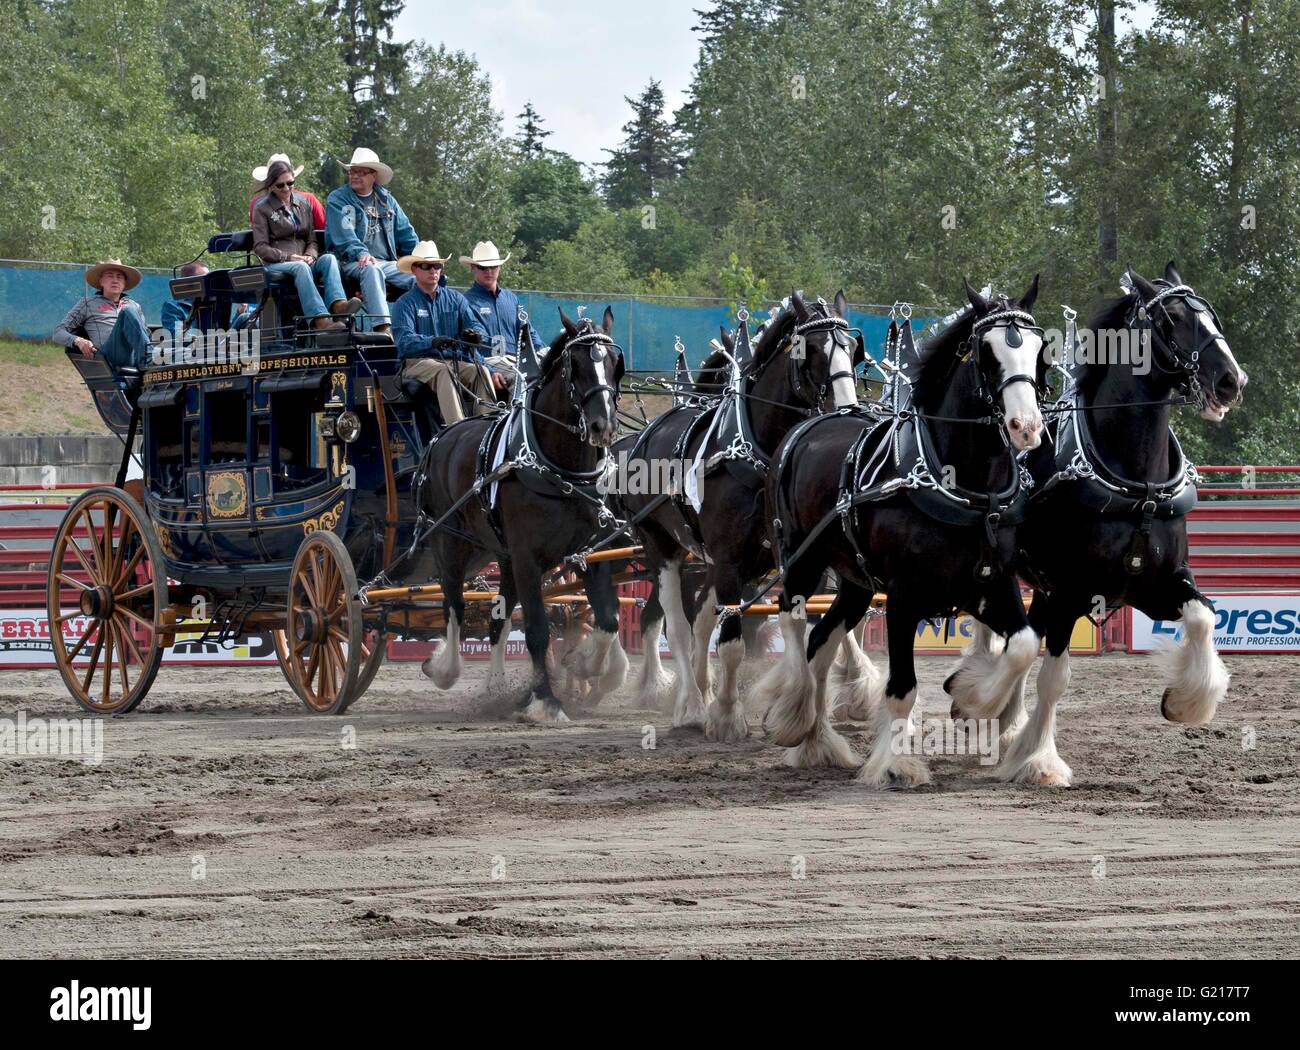 Surrey, Canada. 21st May, 2016. A show case of a traditional horse-drawn stagecoach is seen during the Cloverdale Rodeo in Surrey, Canada, May 21, 2016. More than 95 cowboys and cowgirls compete their riding skills at the 70th Cloverdale Rodeo in Surrey, Canada. Cloverdale Rodeo is one of the biggest and longest running rodeo event in North America. Credit:  Andrew Soong/Xinhua/Alamy Live News Stock Photo